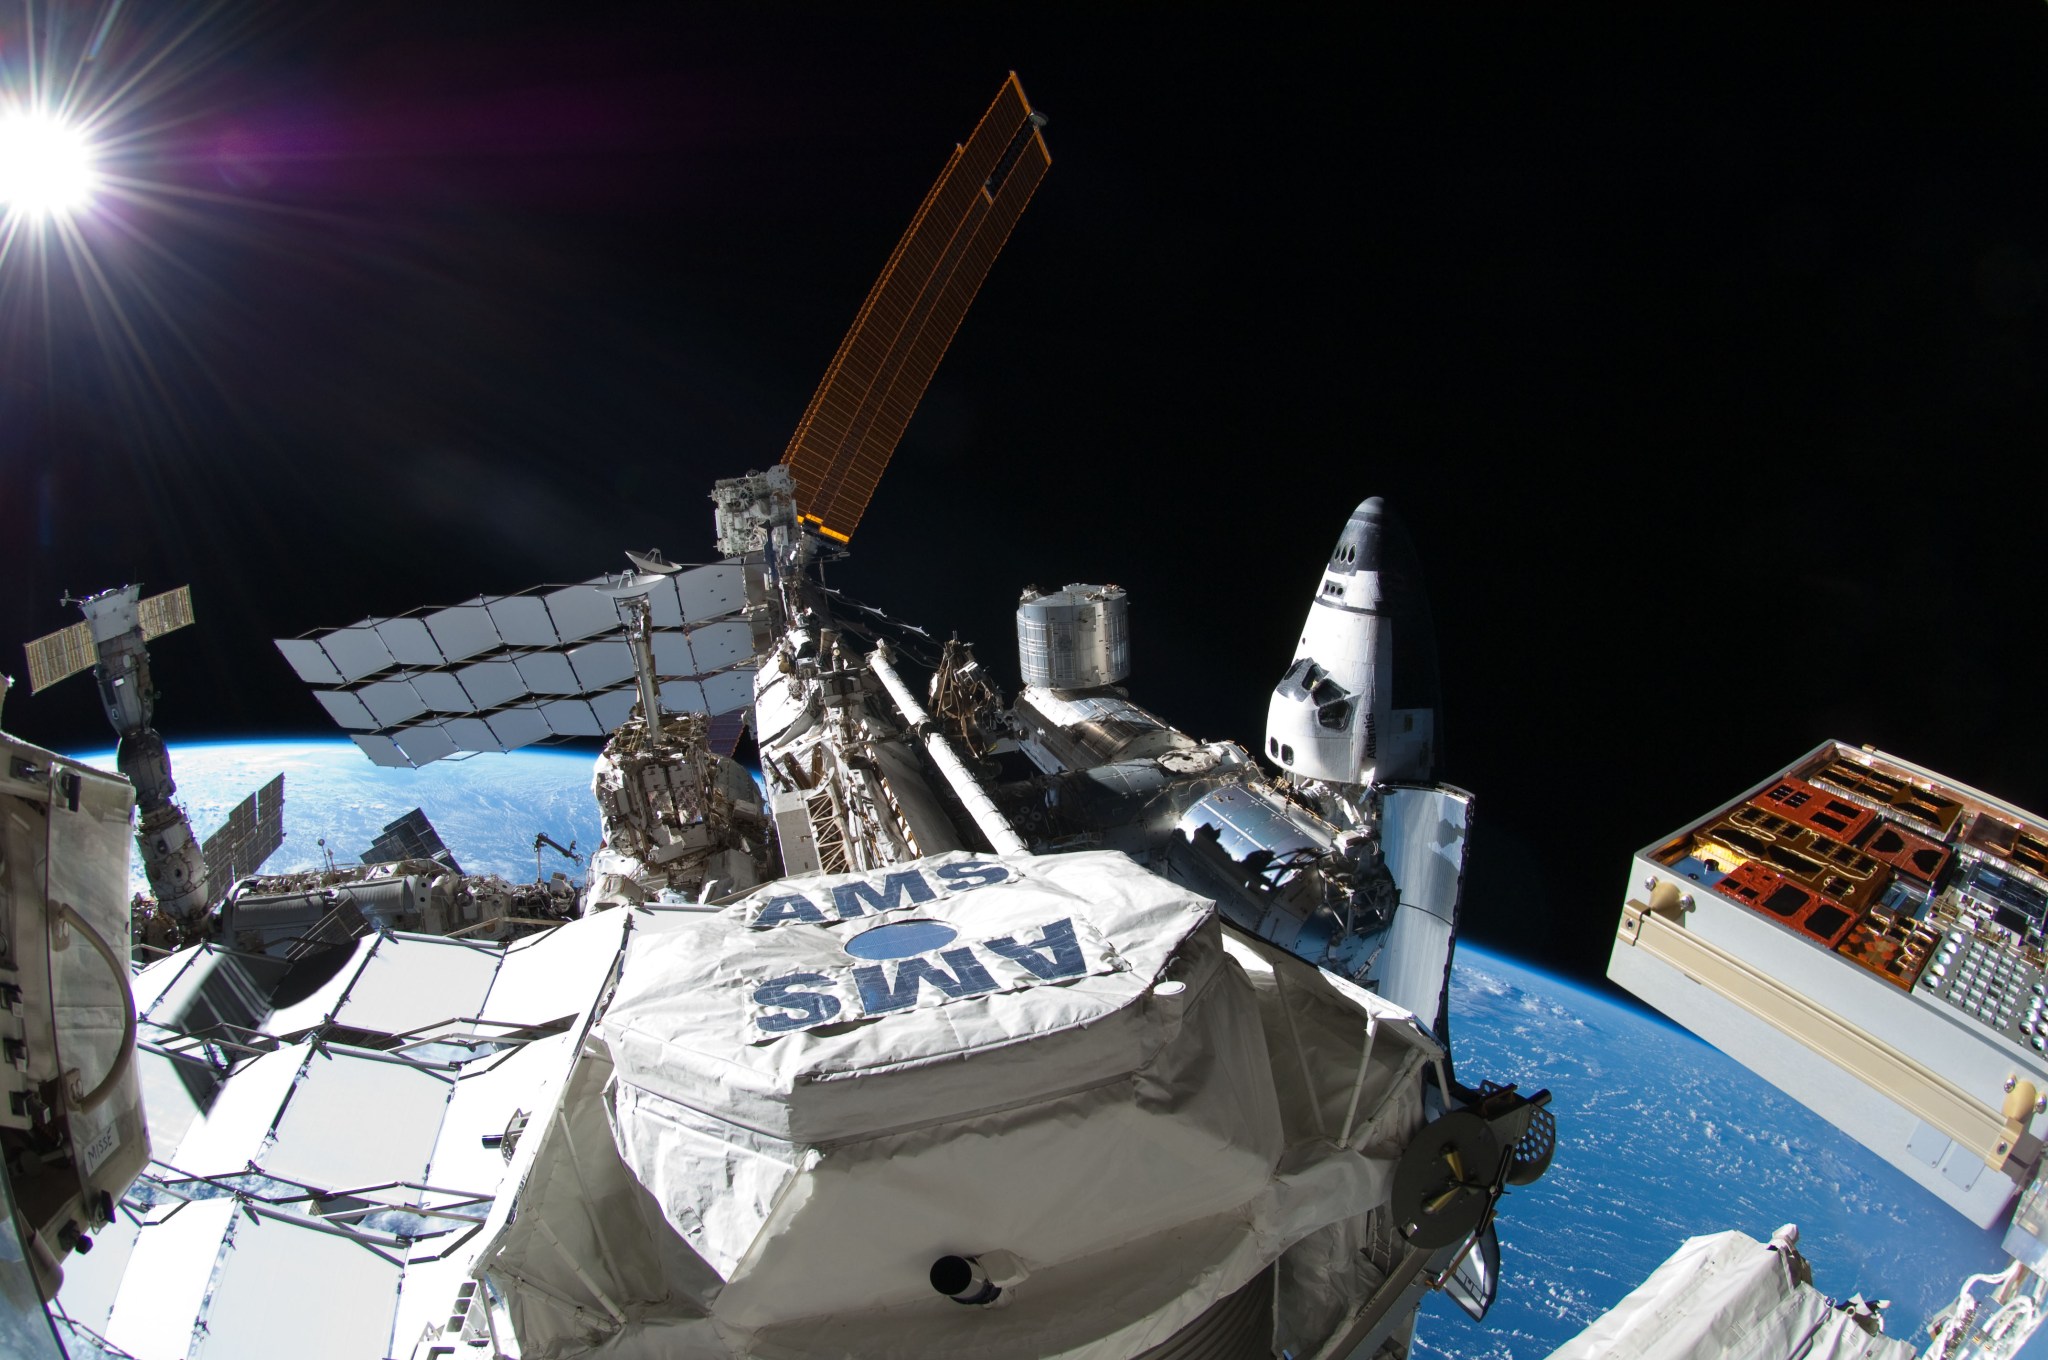 The Alpha Magnetic Spectrometer (AMS) experiment is installed on the International Space Station's integrated truss structure.